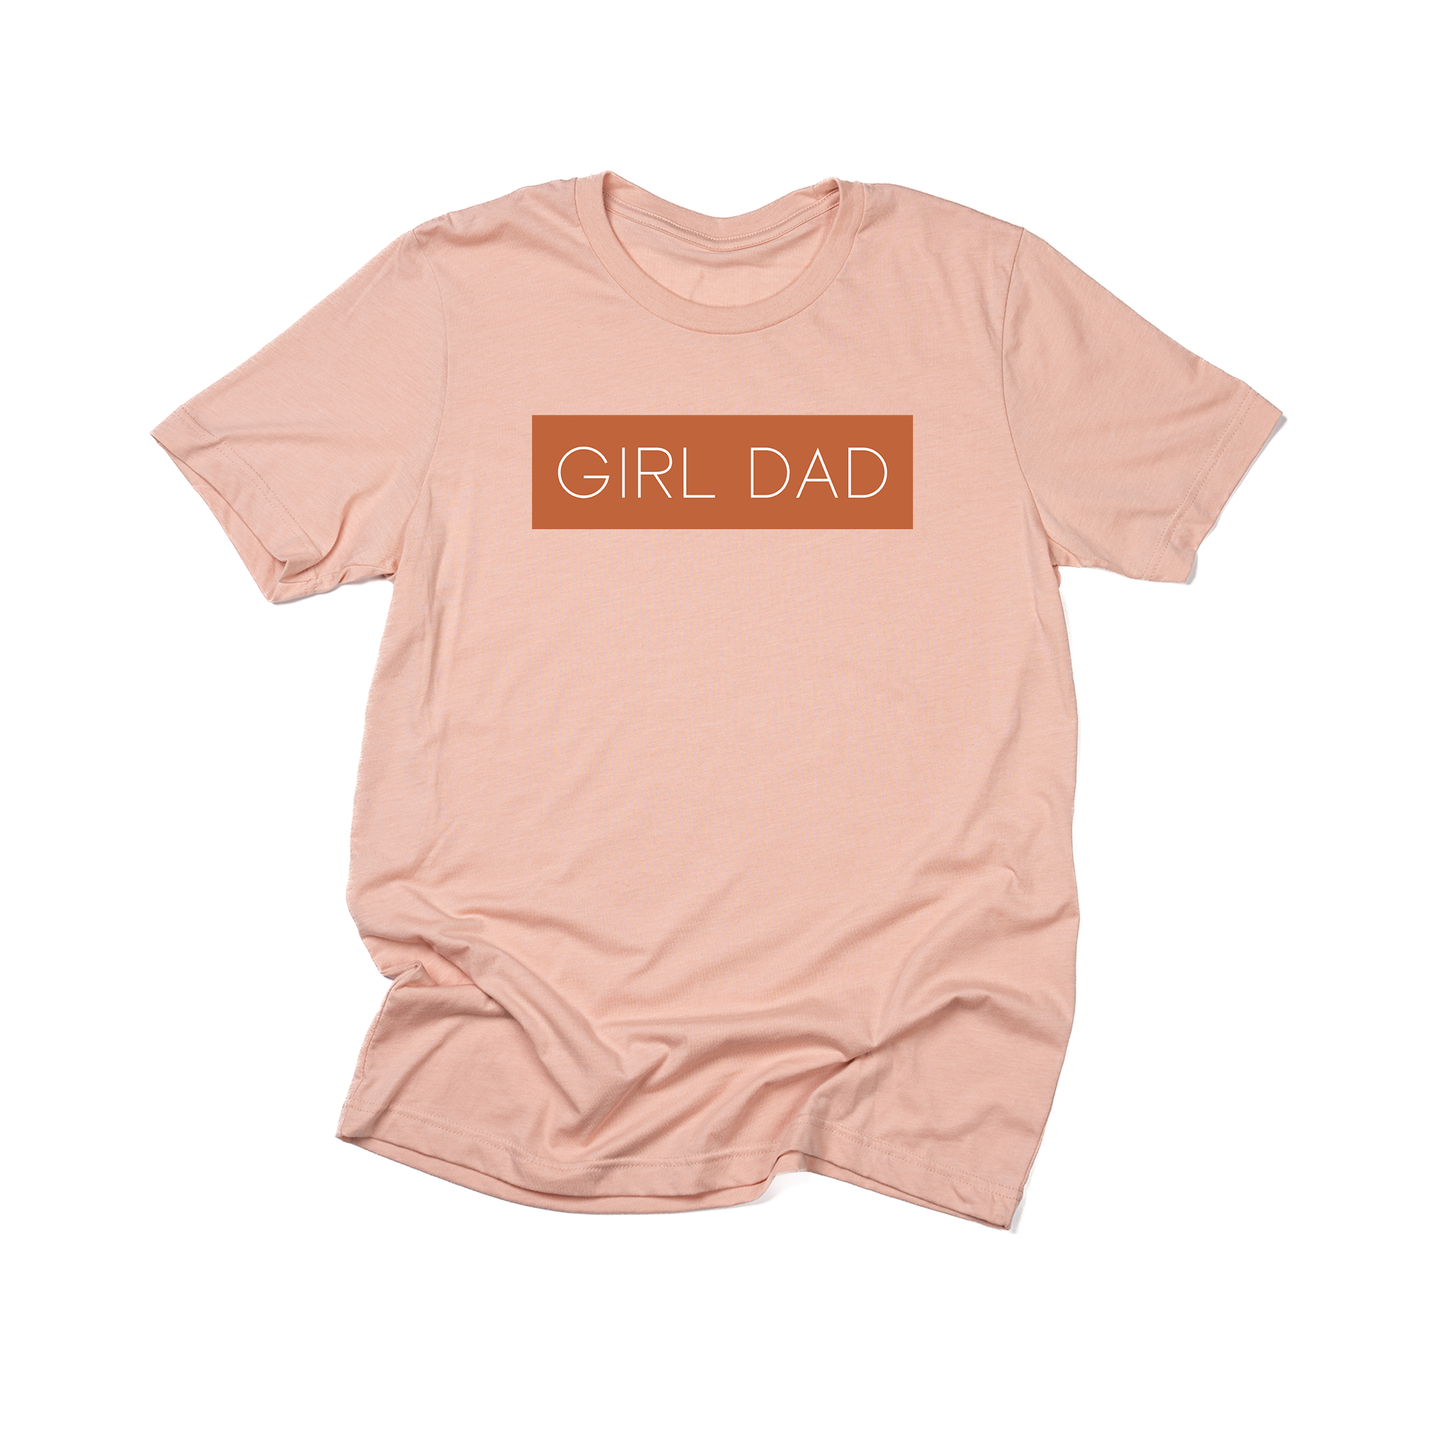 Girl Dad® (Boxed Collection, Rust Box/White Text) - Tee (Peach)